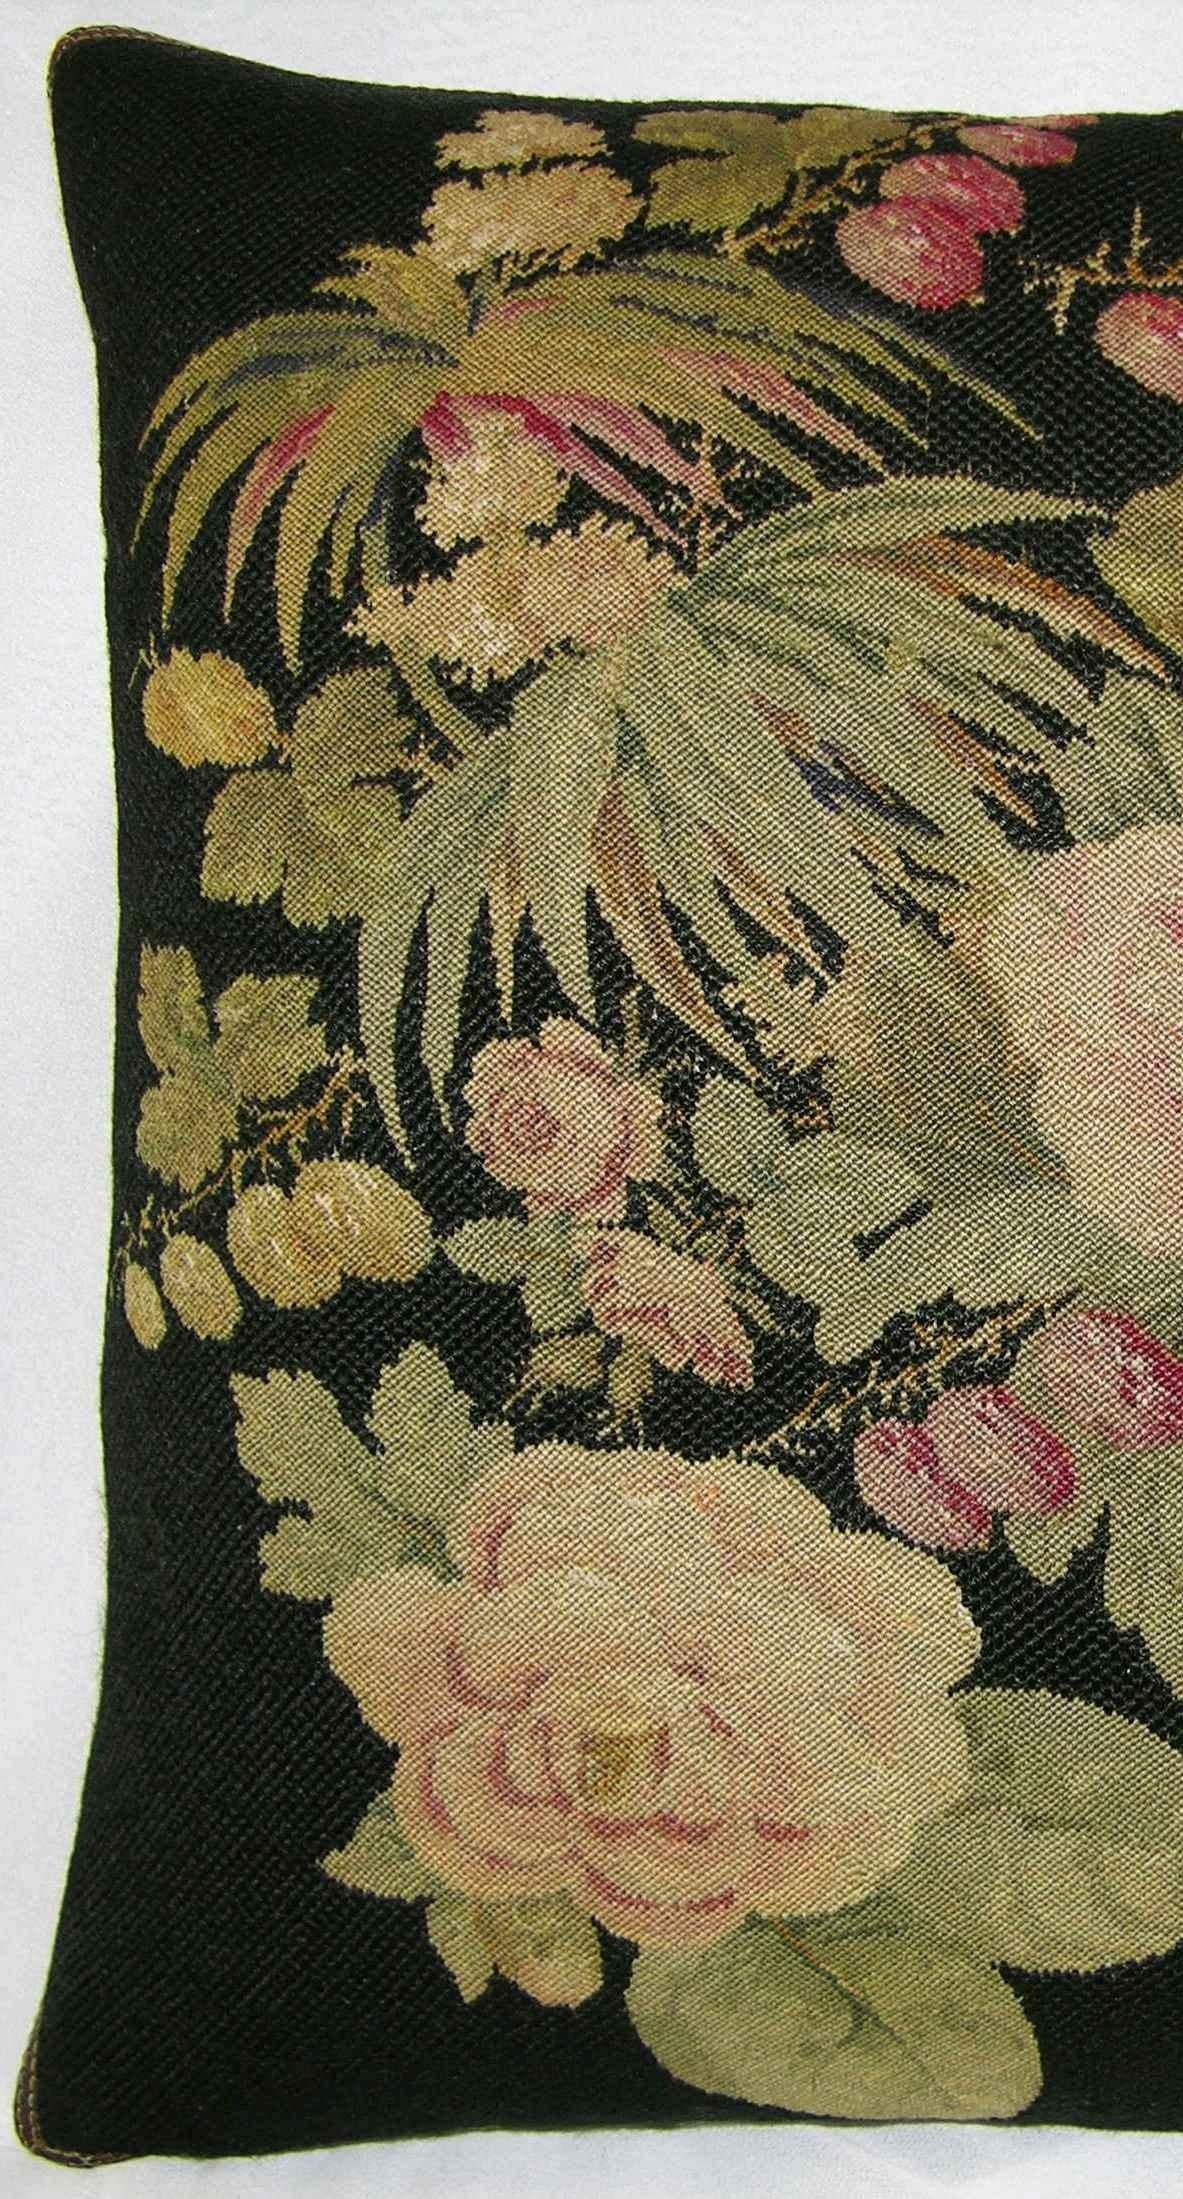 1880 Antique French Needlepoint Pillow - 19 X 18 In Good Condition For Sale In Los Angeles, US